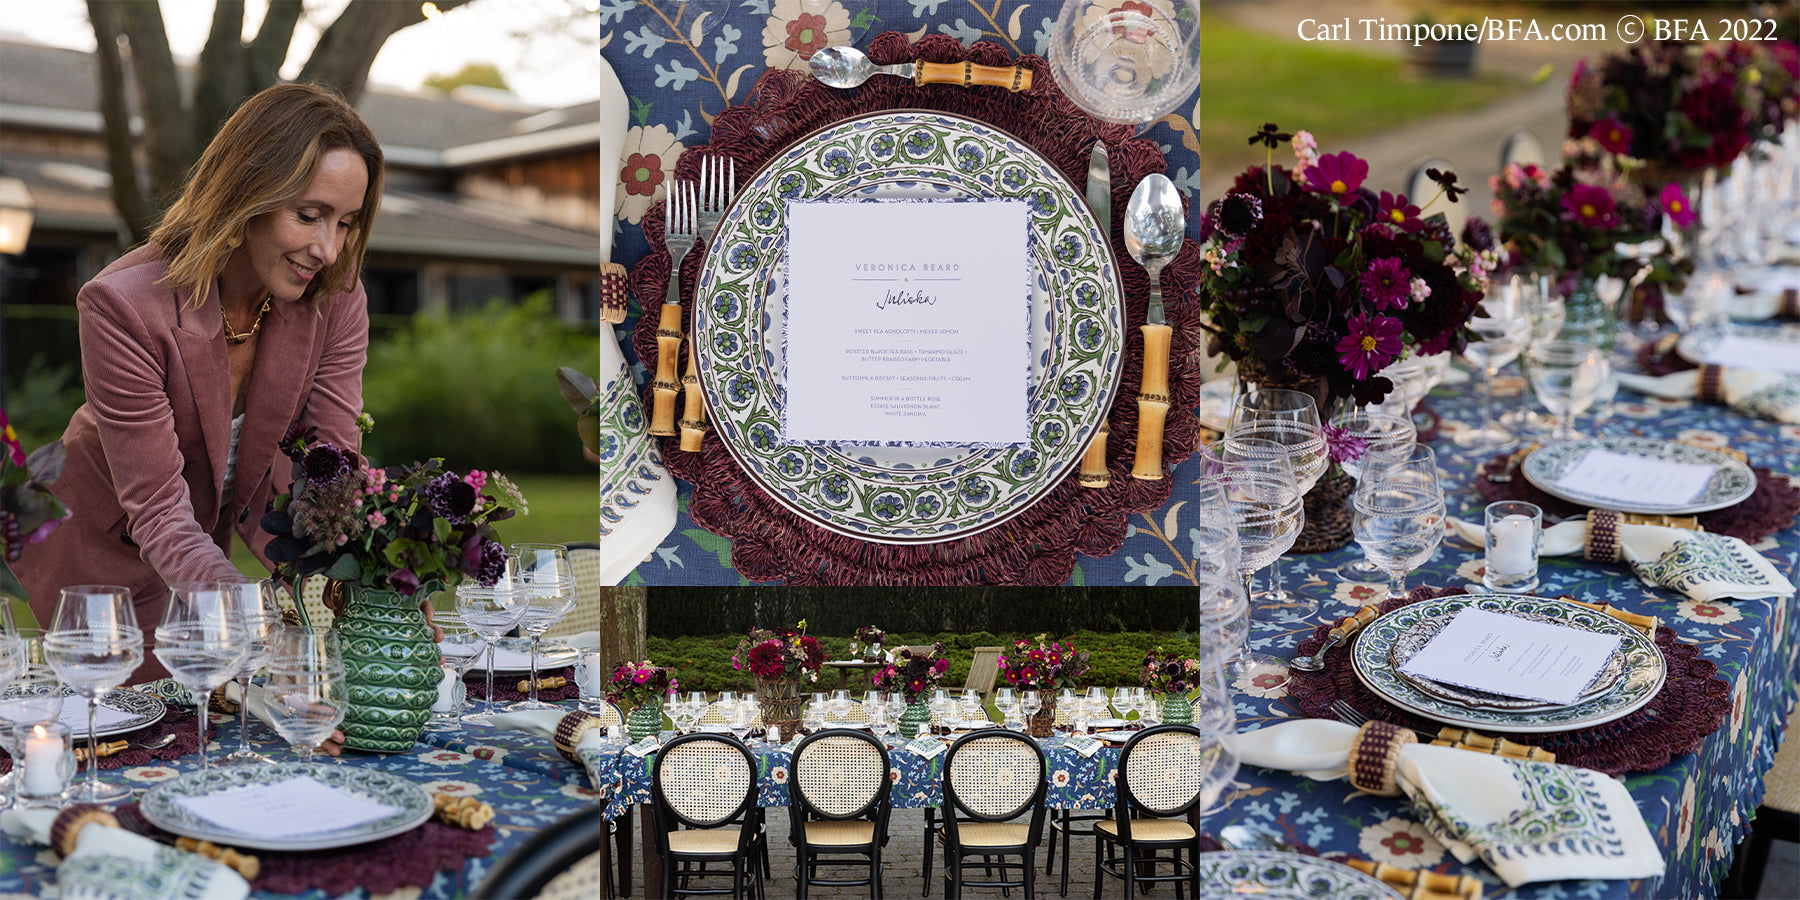 Party place settings and décor images.